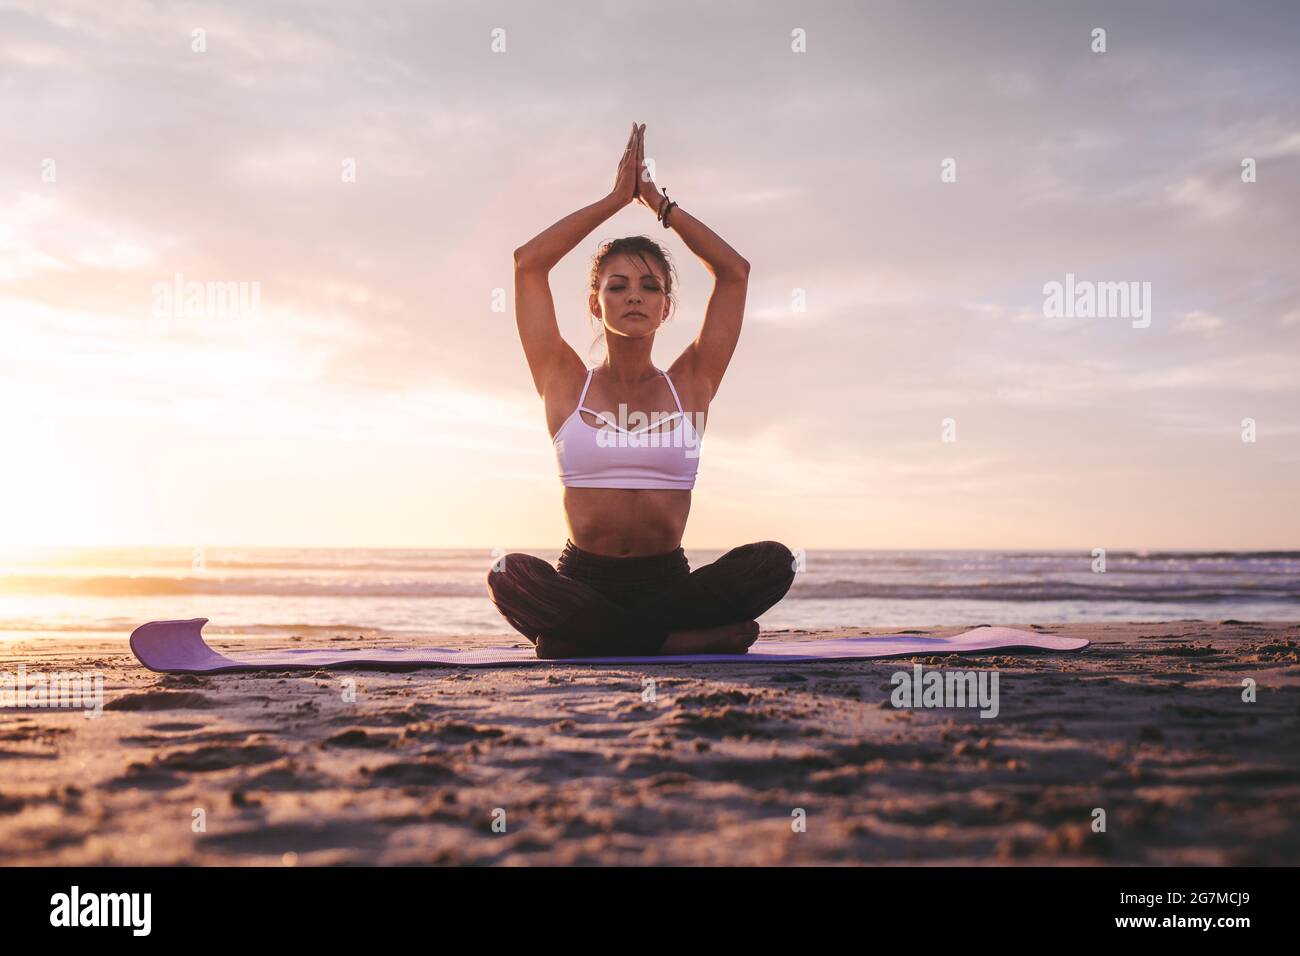 Woman in meditation on the beach. Young female sitting on the beach in lotus pose doing relaxation exercise during sunset. Stock Photo